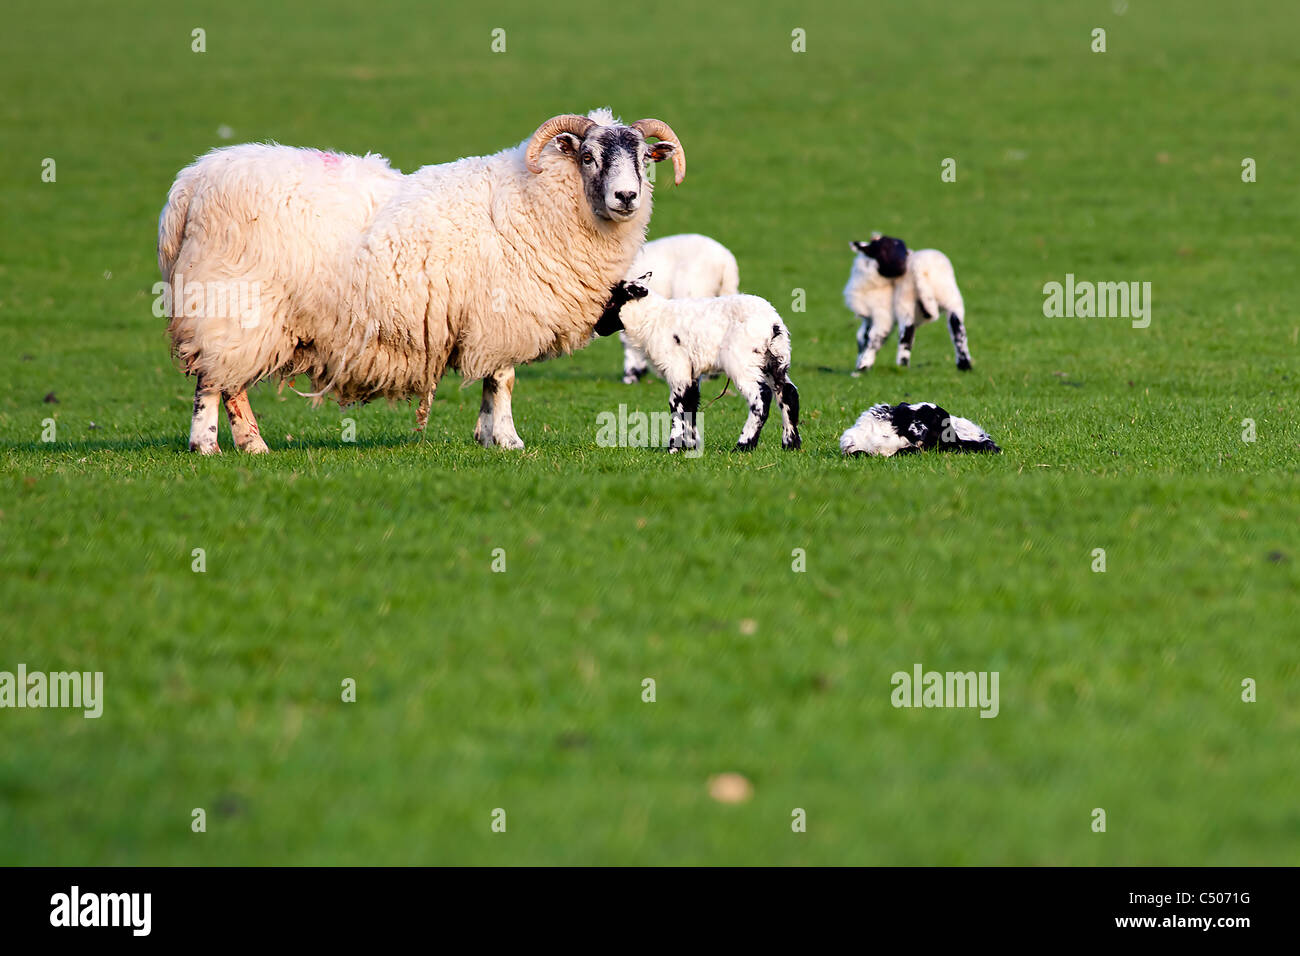 Sheep with her young childs in Scotland Stock Photo